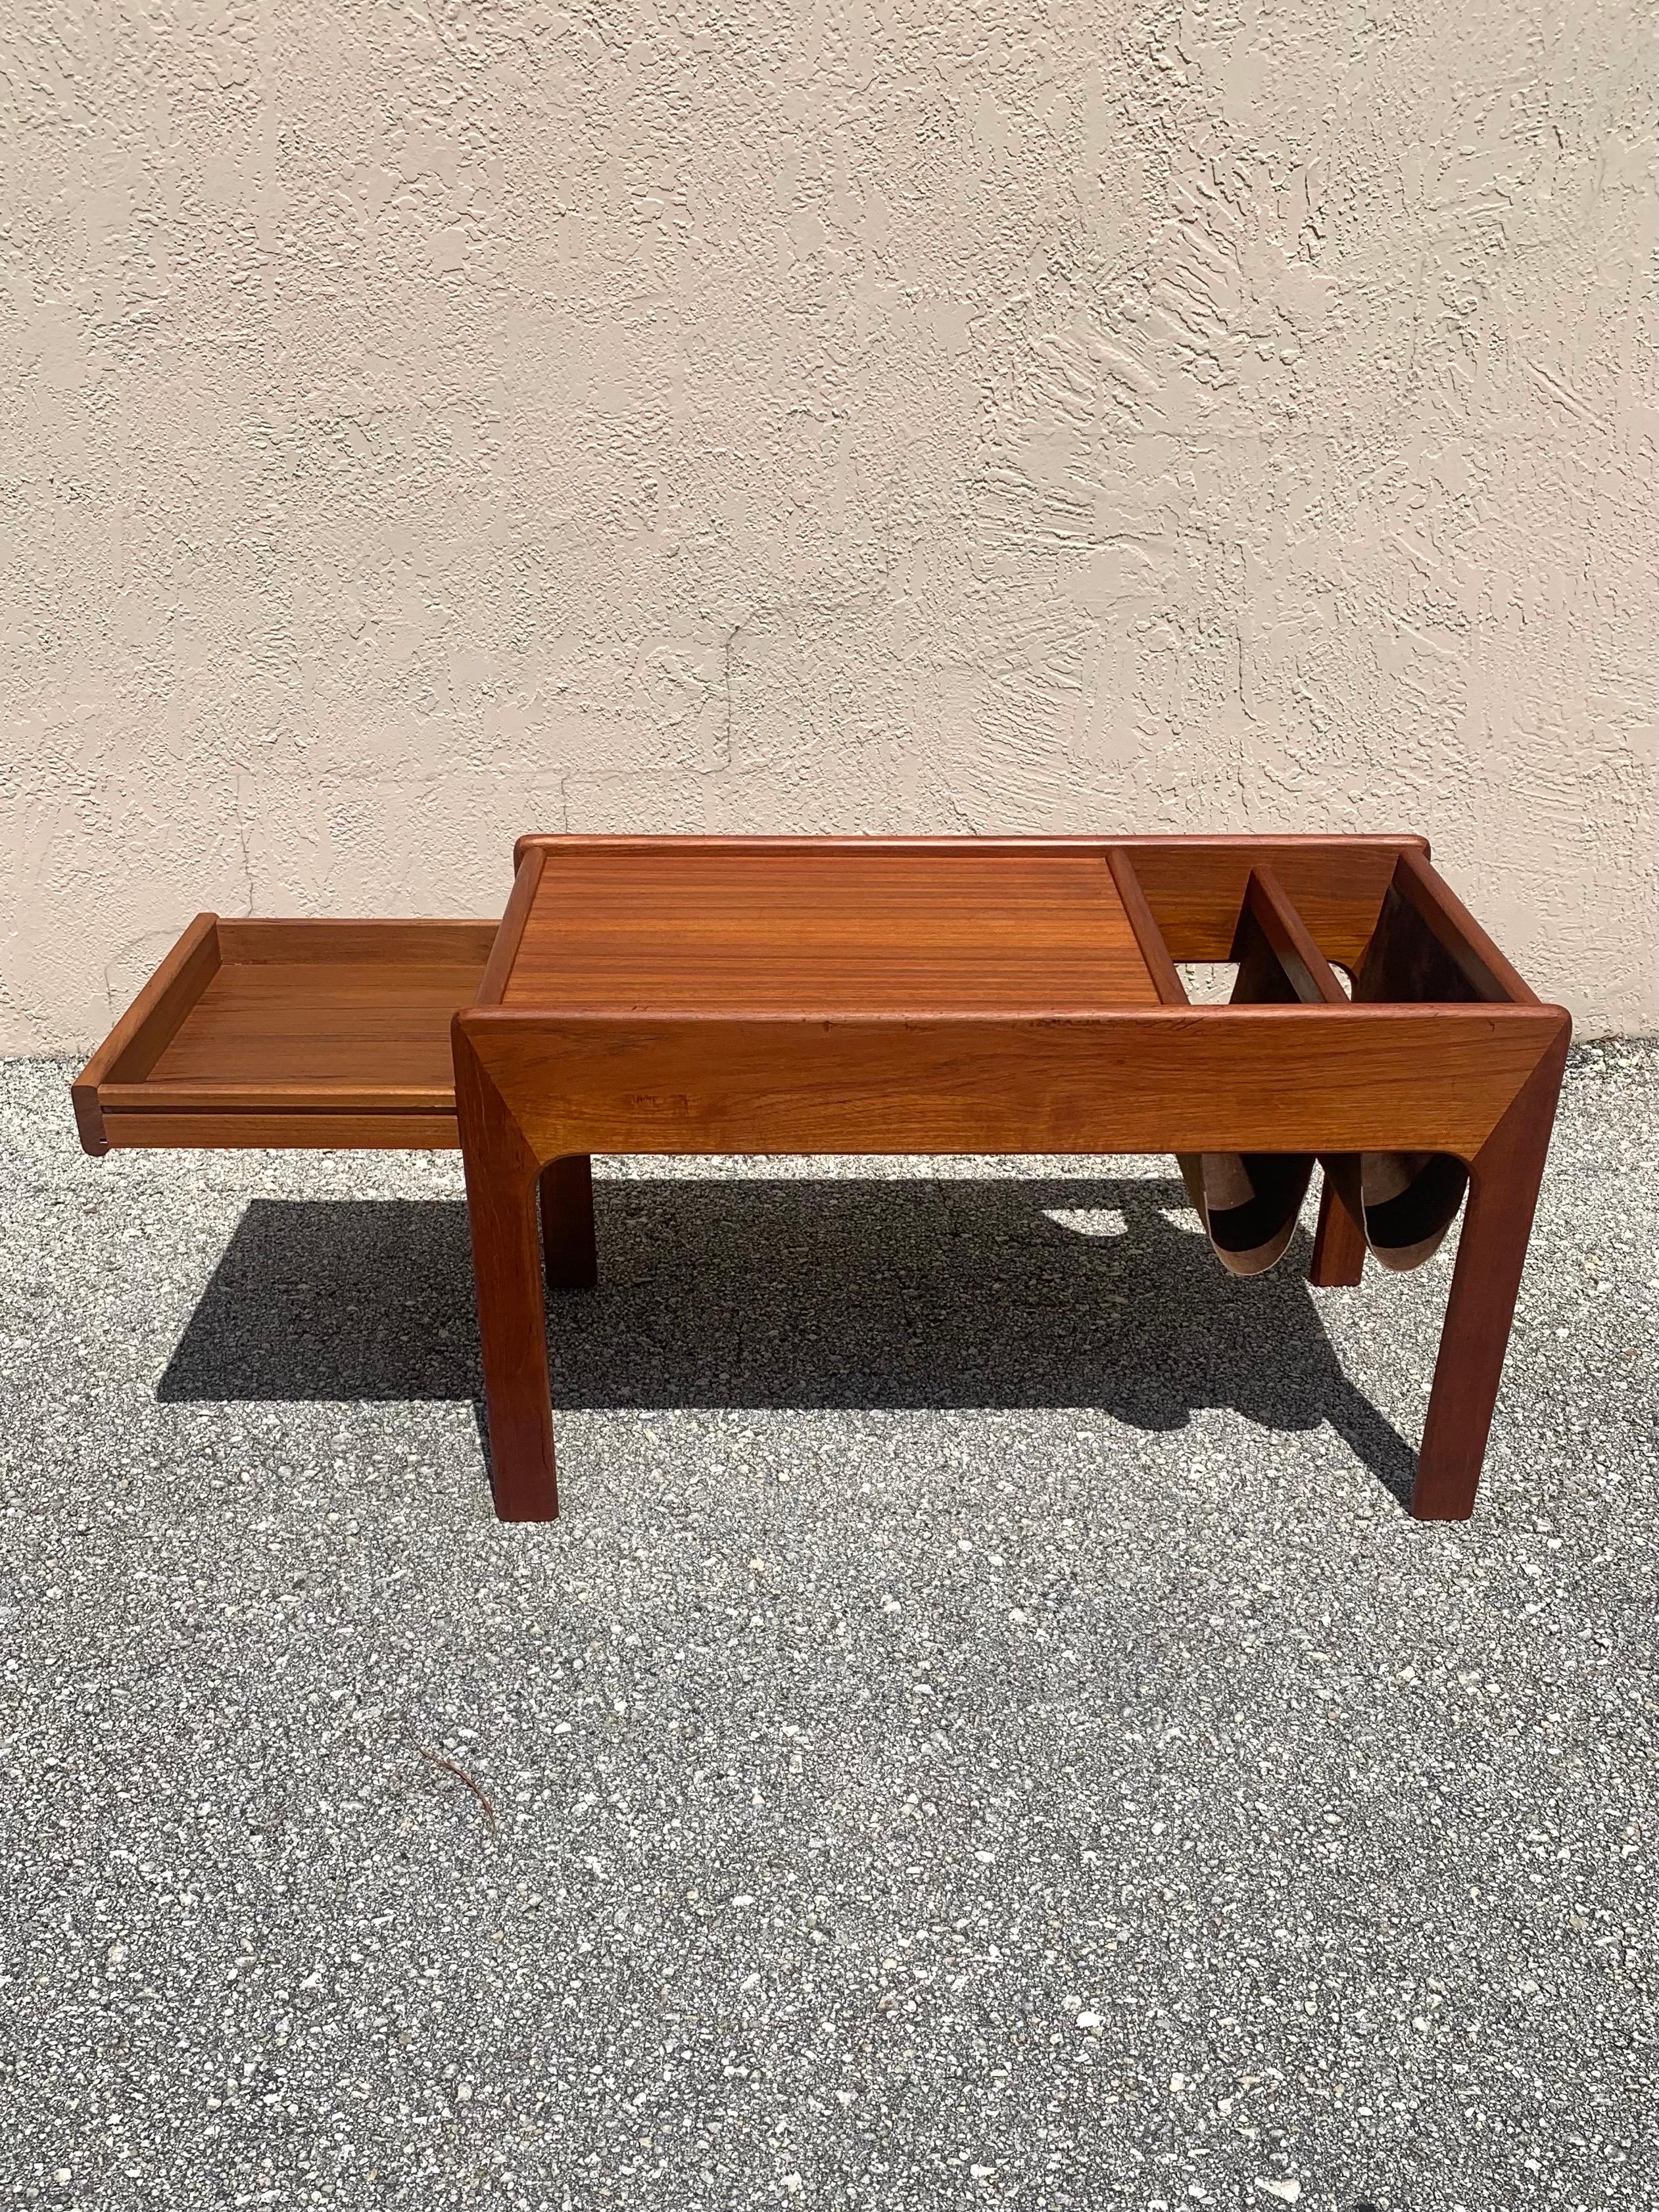 Mid-Century Modern coffee table and magazine rack. Made in Denmark. Stunning natural grains pair beautifully with the suede magazine slings. 

The frame of the table is made from solid teak wood. The table top is teak veneer. On the side there is